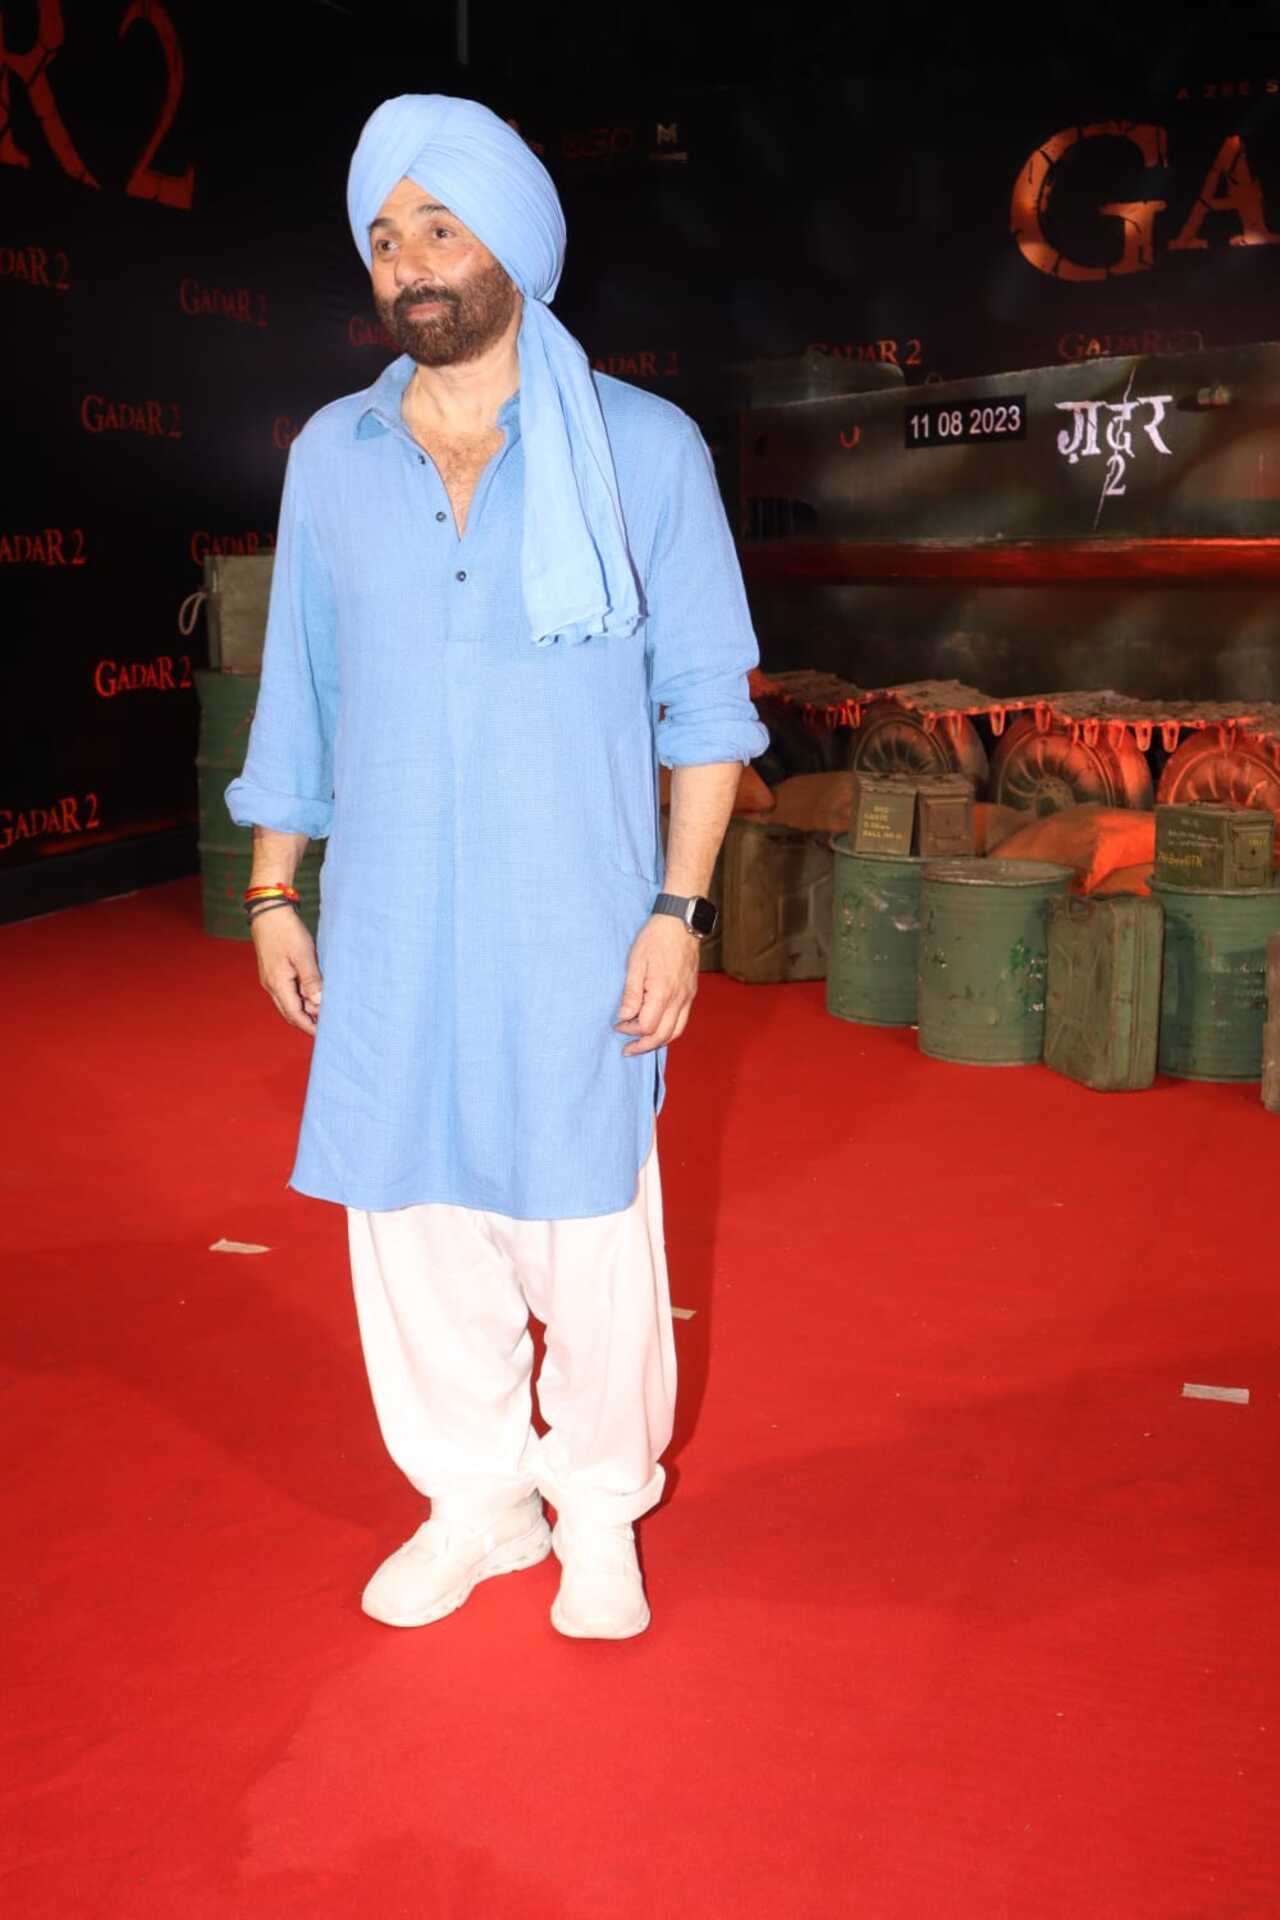 Sunny Deol attended the screening of his recently released film Gadar 2